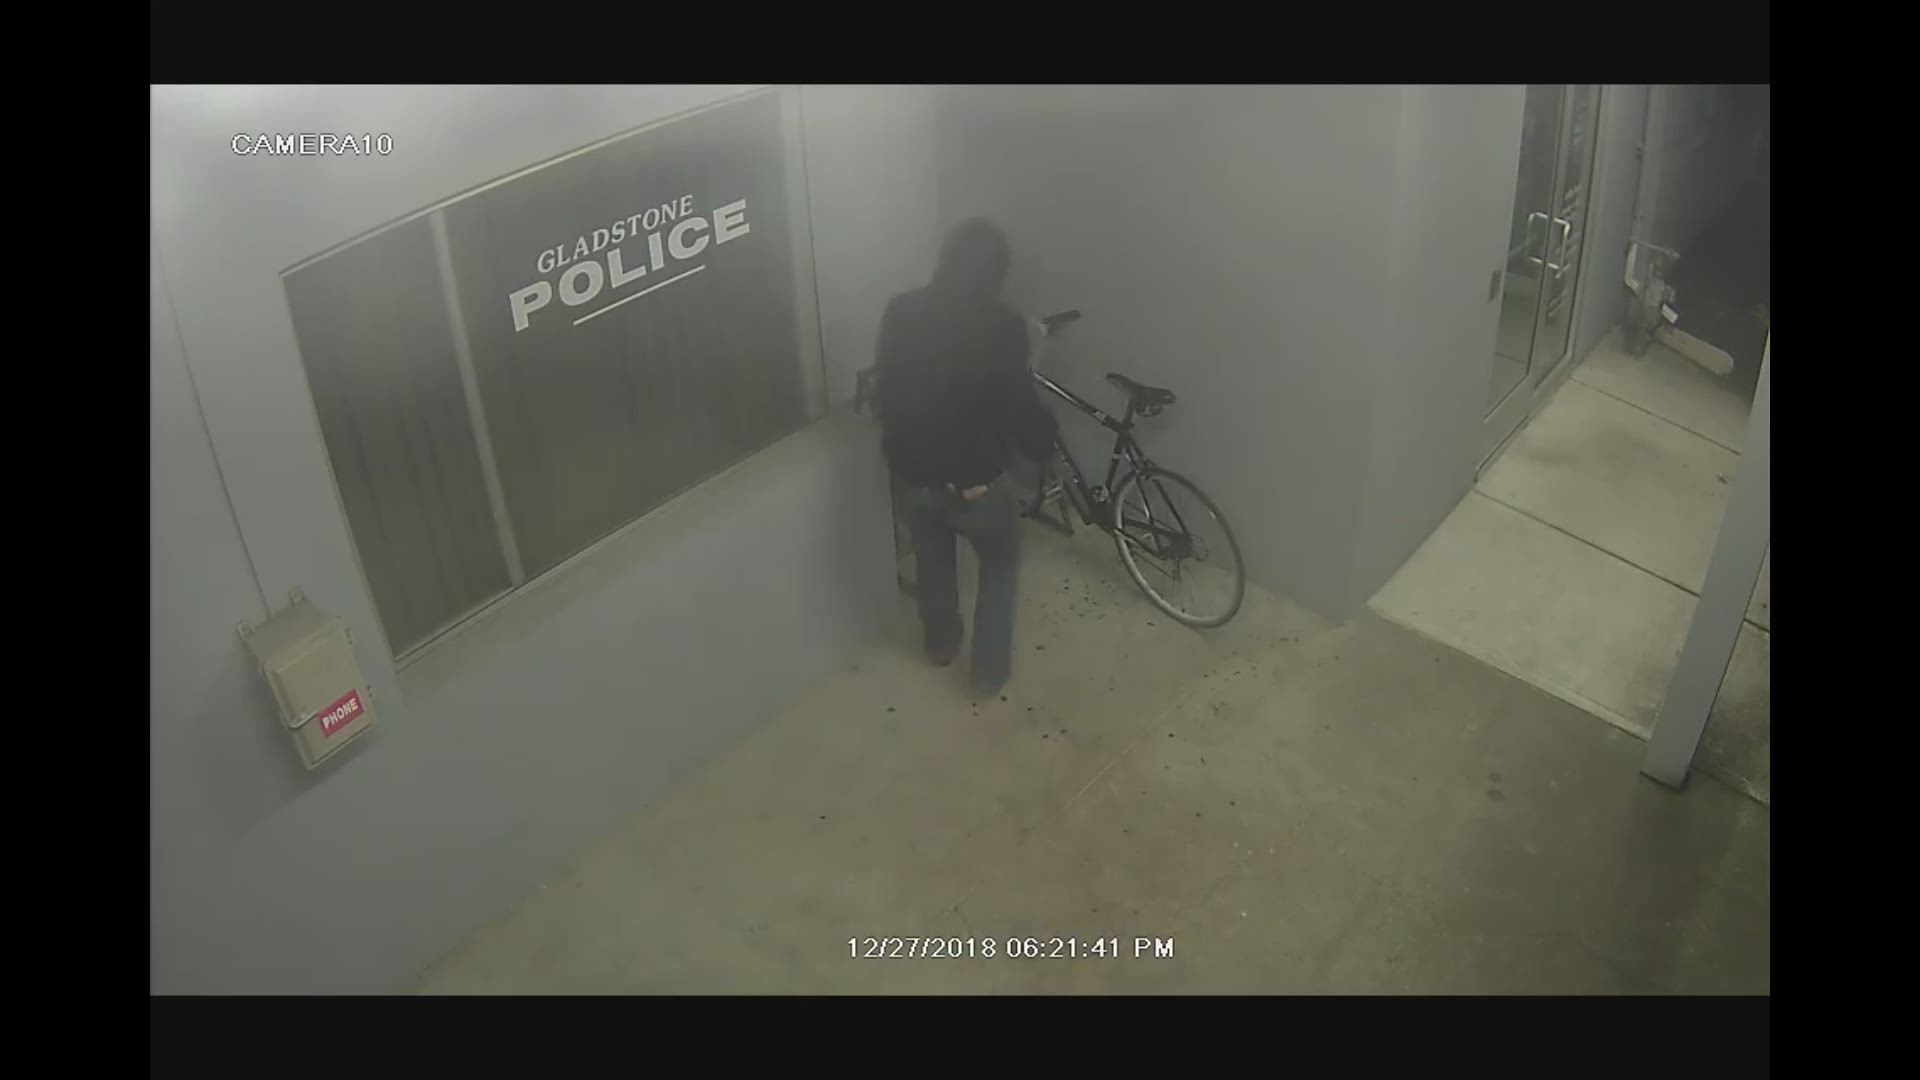 Stealing a bike from a police station isn't a great idea, but that's what almost happened in Gladstone, Oregon.